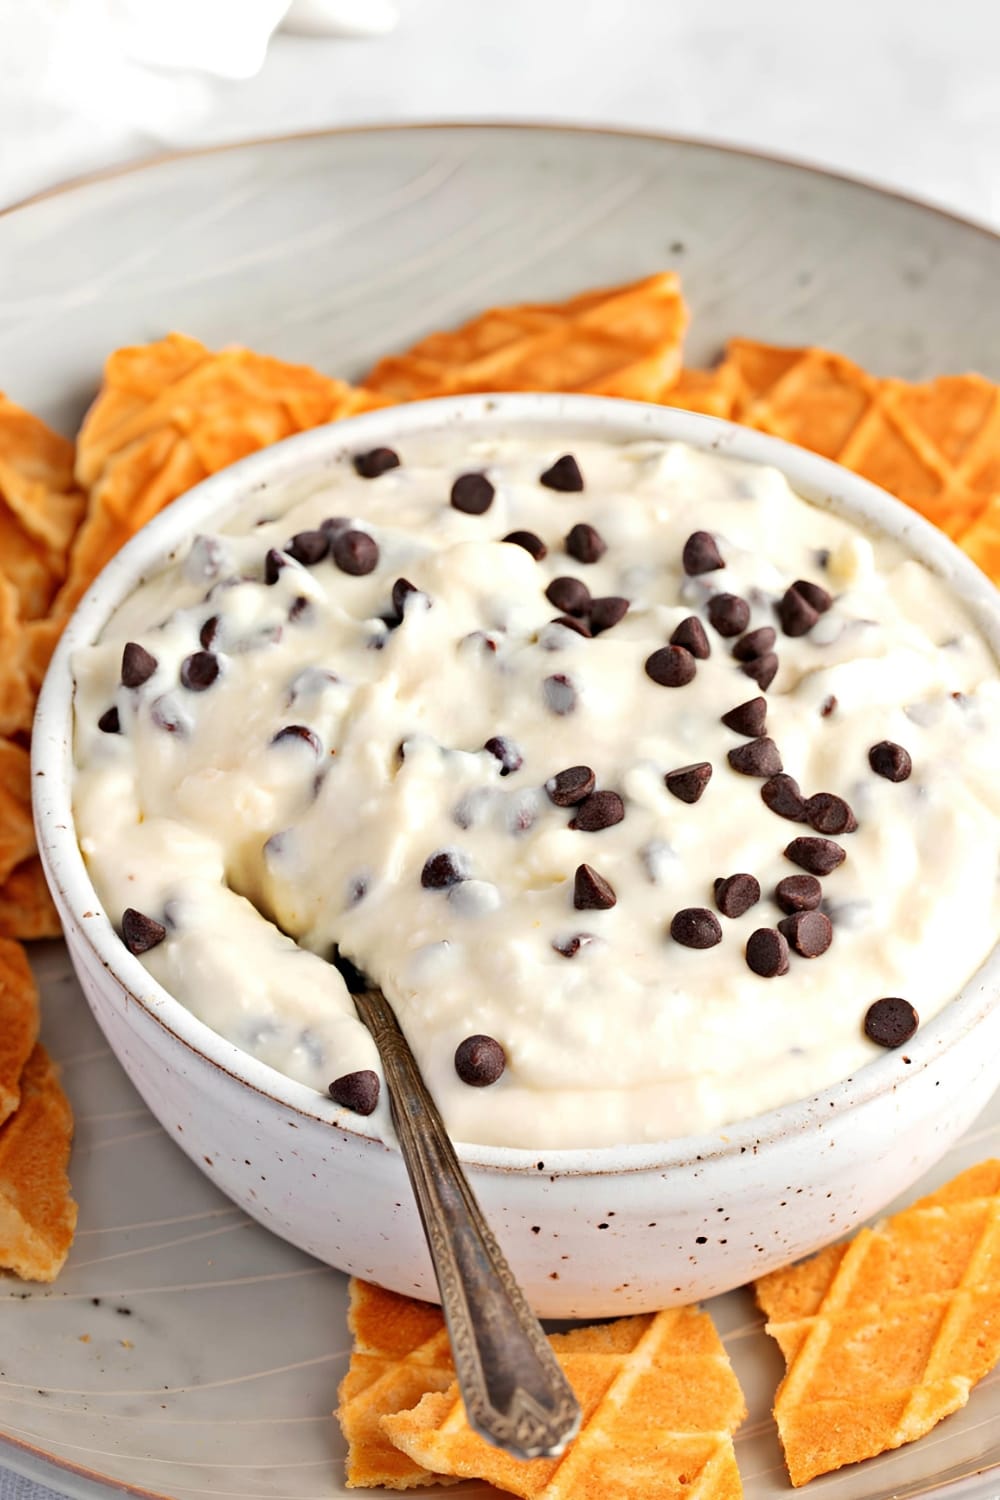 Bowl of Cannoli Dip with Chocolate Chips on Top